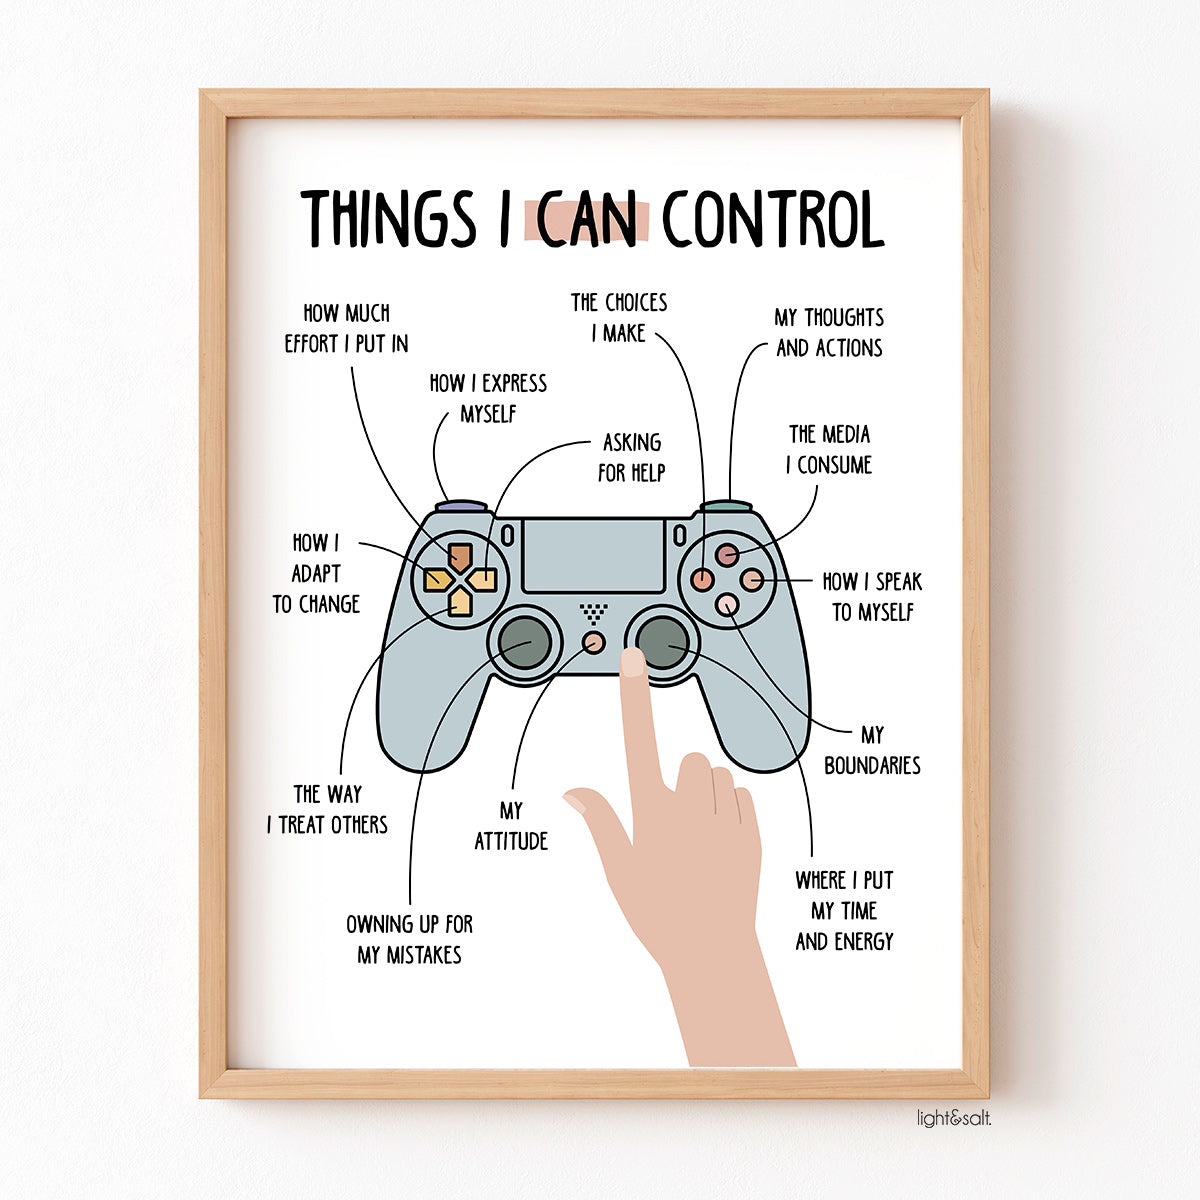 What I can control poster, Circle of control